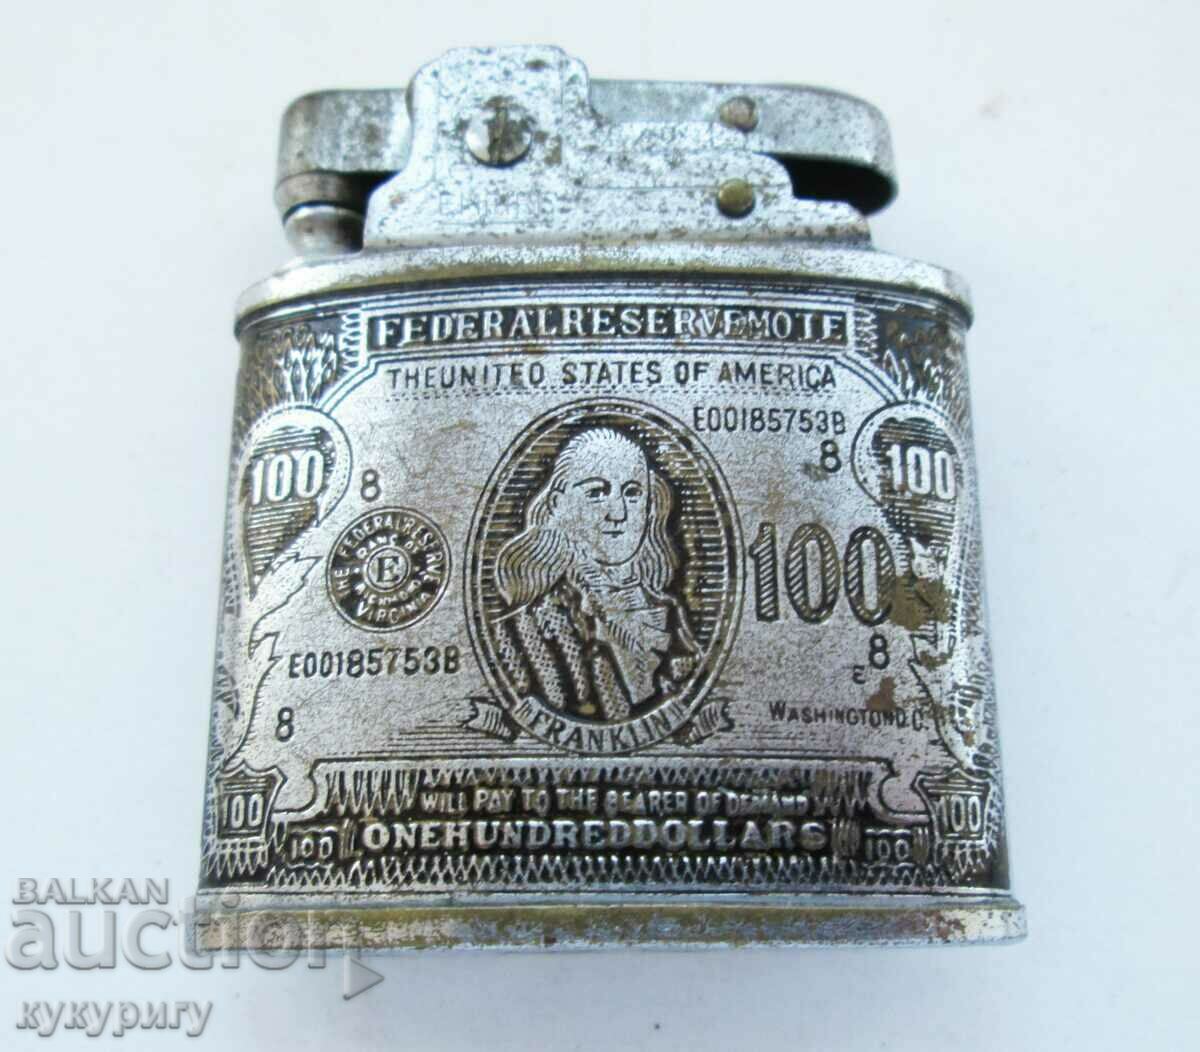 Old collectible gasoline lighter $100 bill